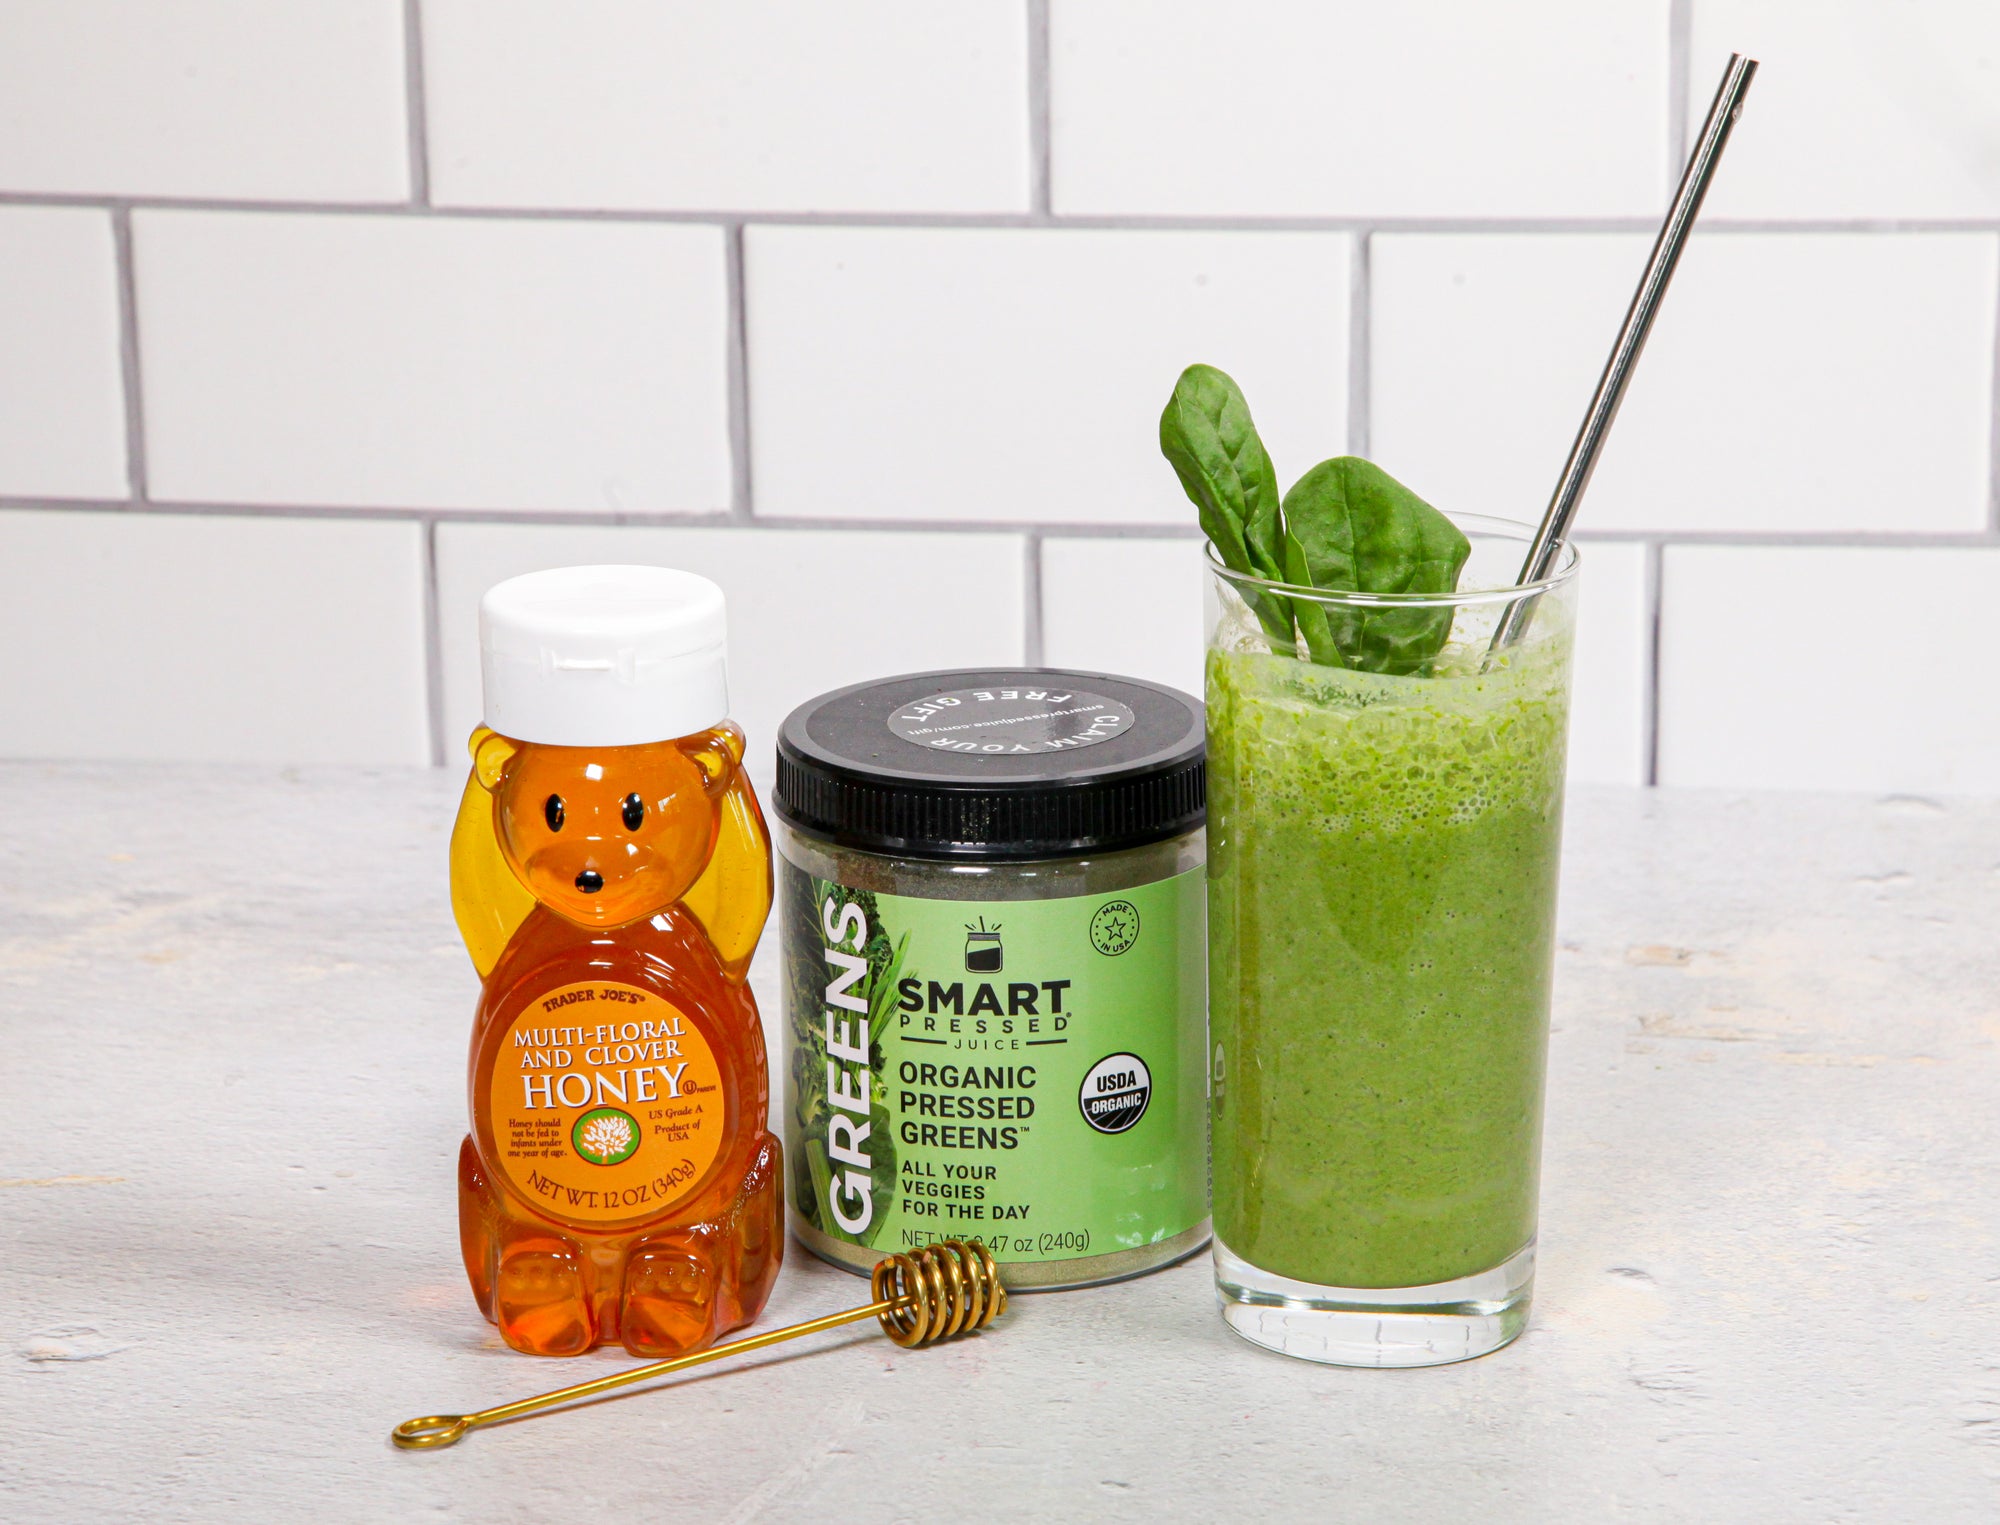 a glass of green apple greens smoothie, a jar of smart labeled organic pressed greens and a bear-shaped container filled with honey and a honey digger on the front on top of a white-painted table